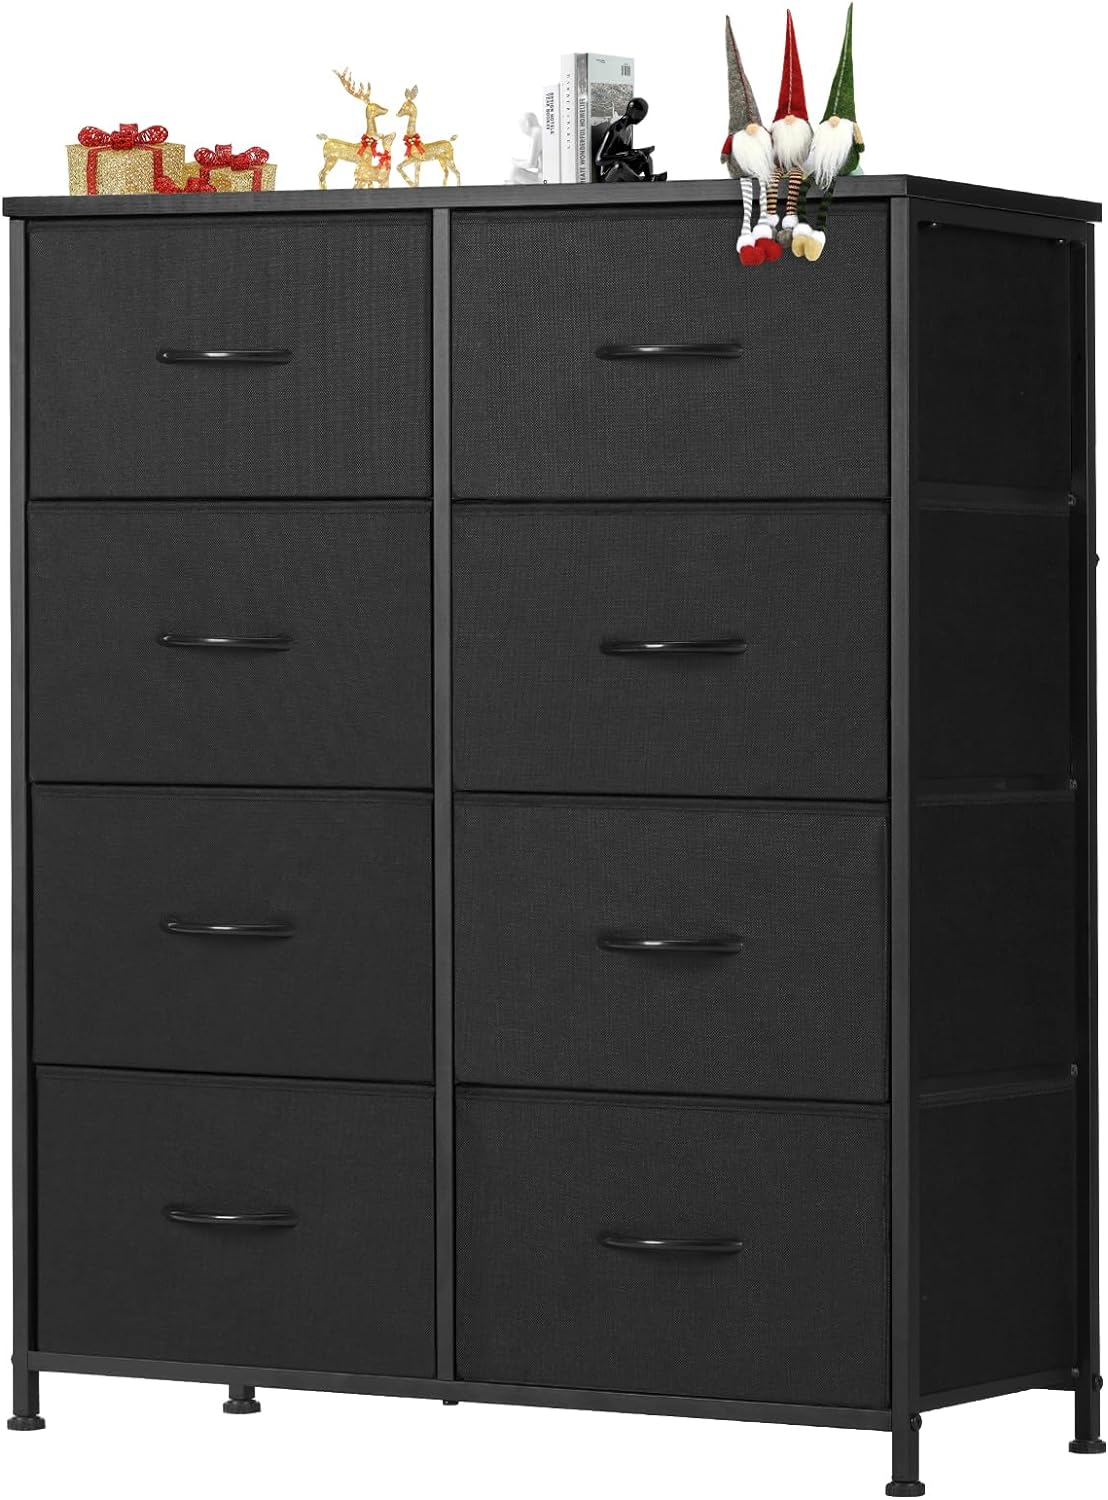 Enjoy Extra Savings Today! DUMOS Dresser for Bedroom with 8 Drawers - Limited-Time Discounts!